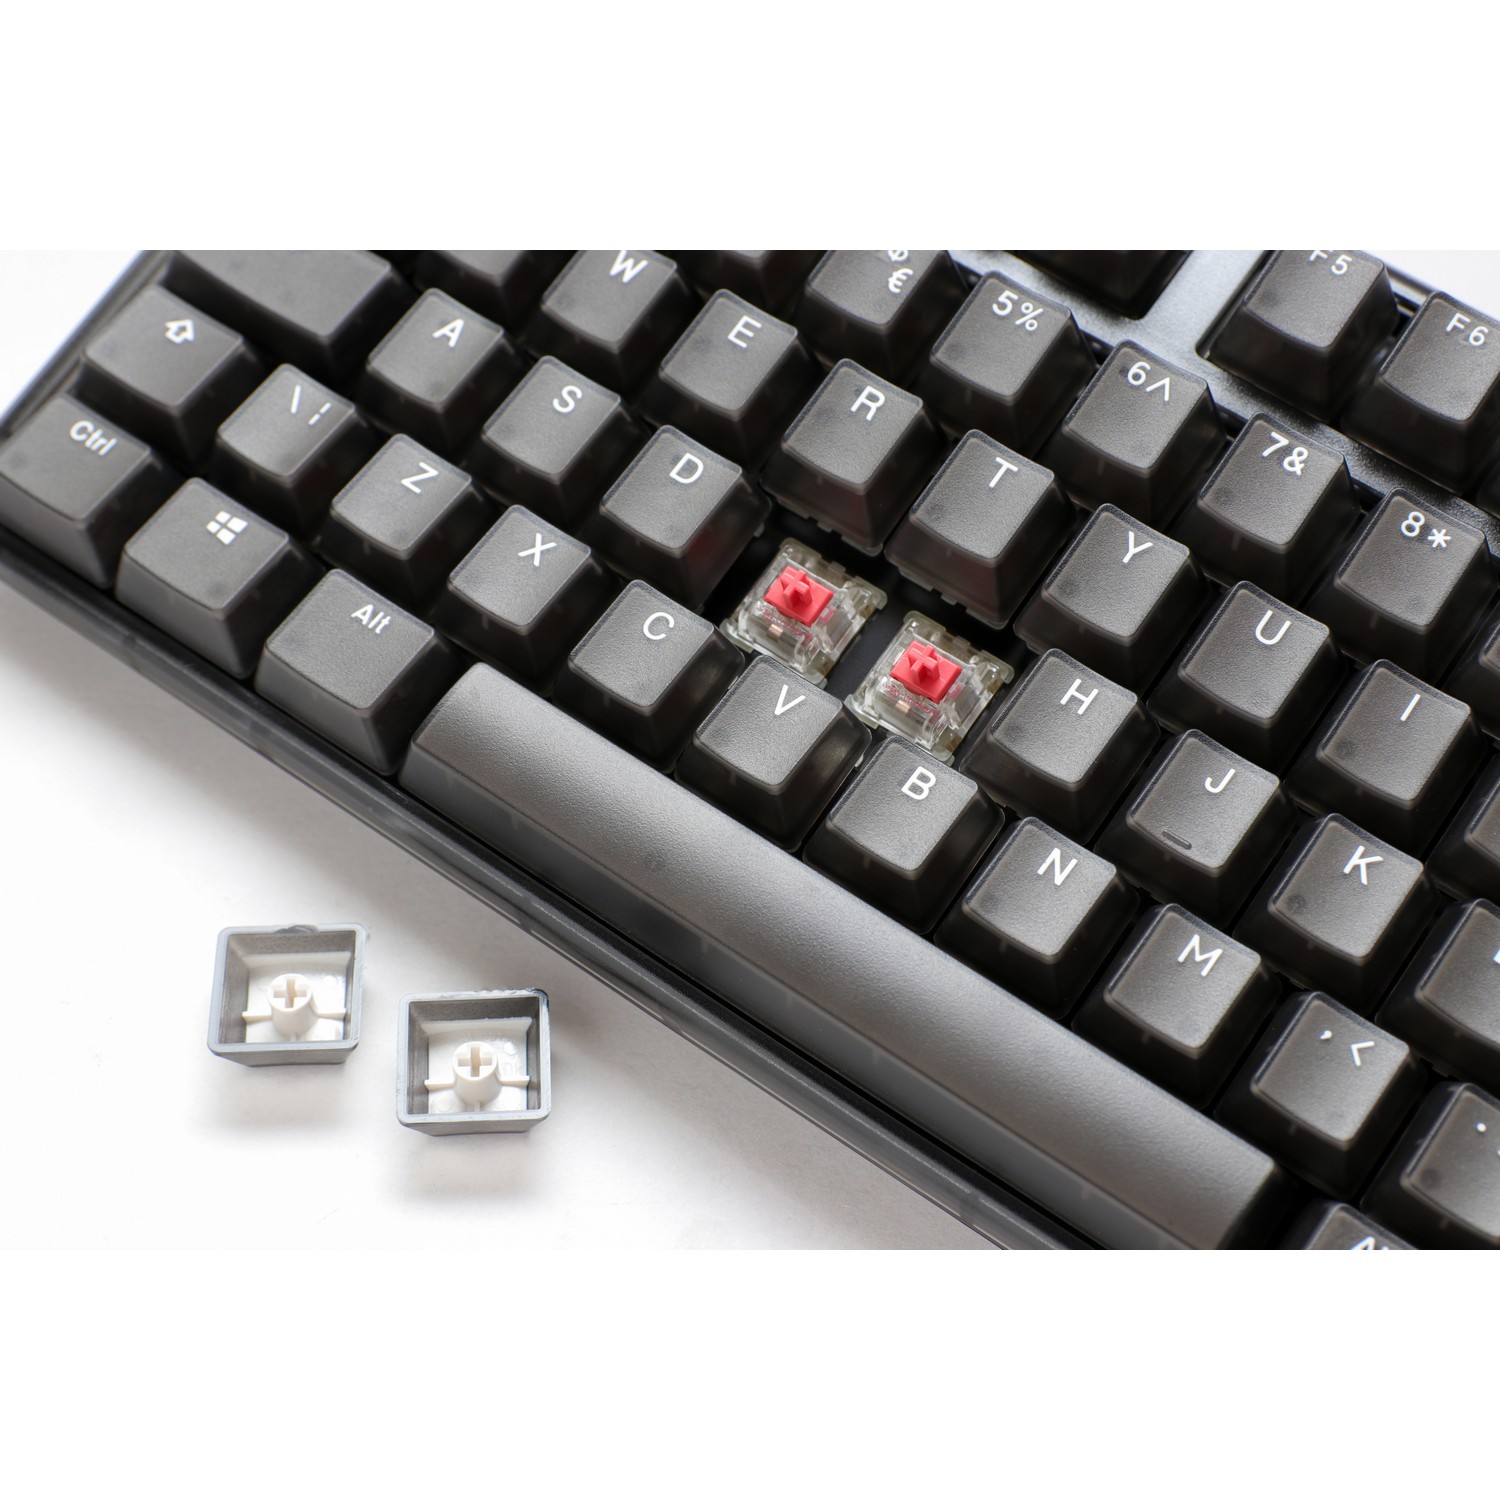 Ducky - Ducky One 3 Aura TKL 80% Mechanical Gaming Keyboard Black Cherry Silent Red Switch UK Layout